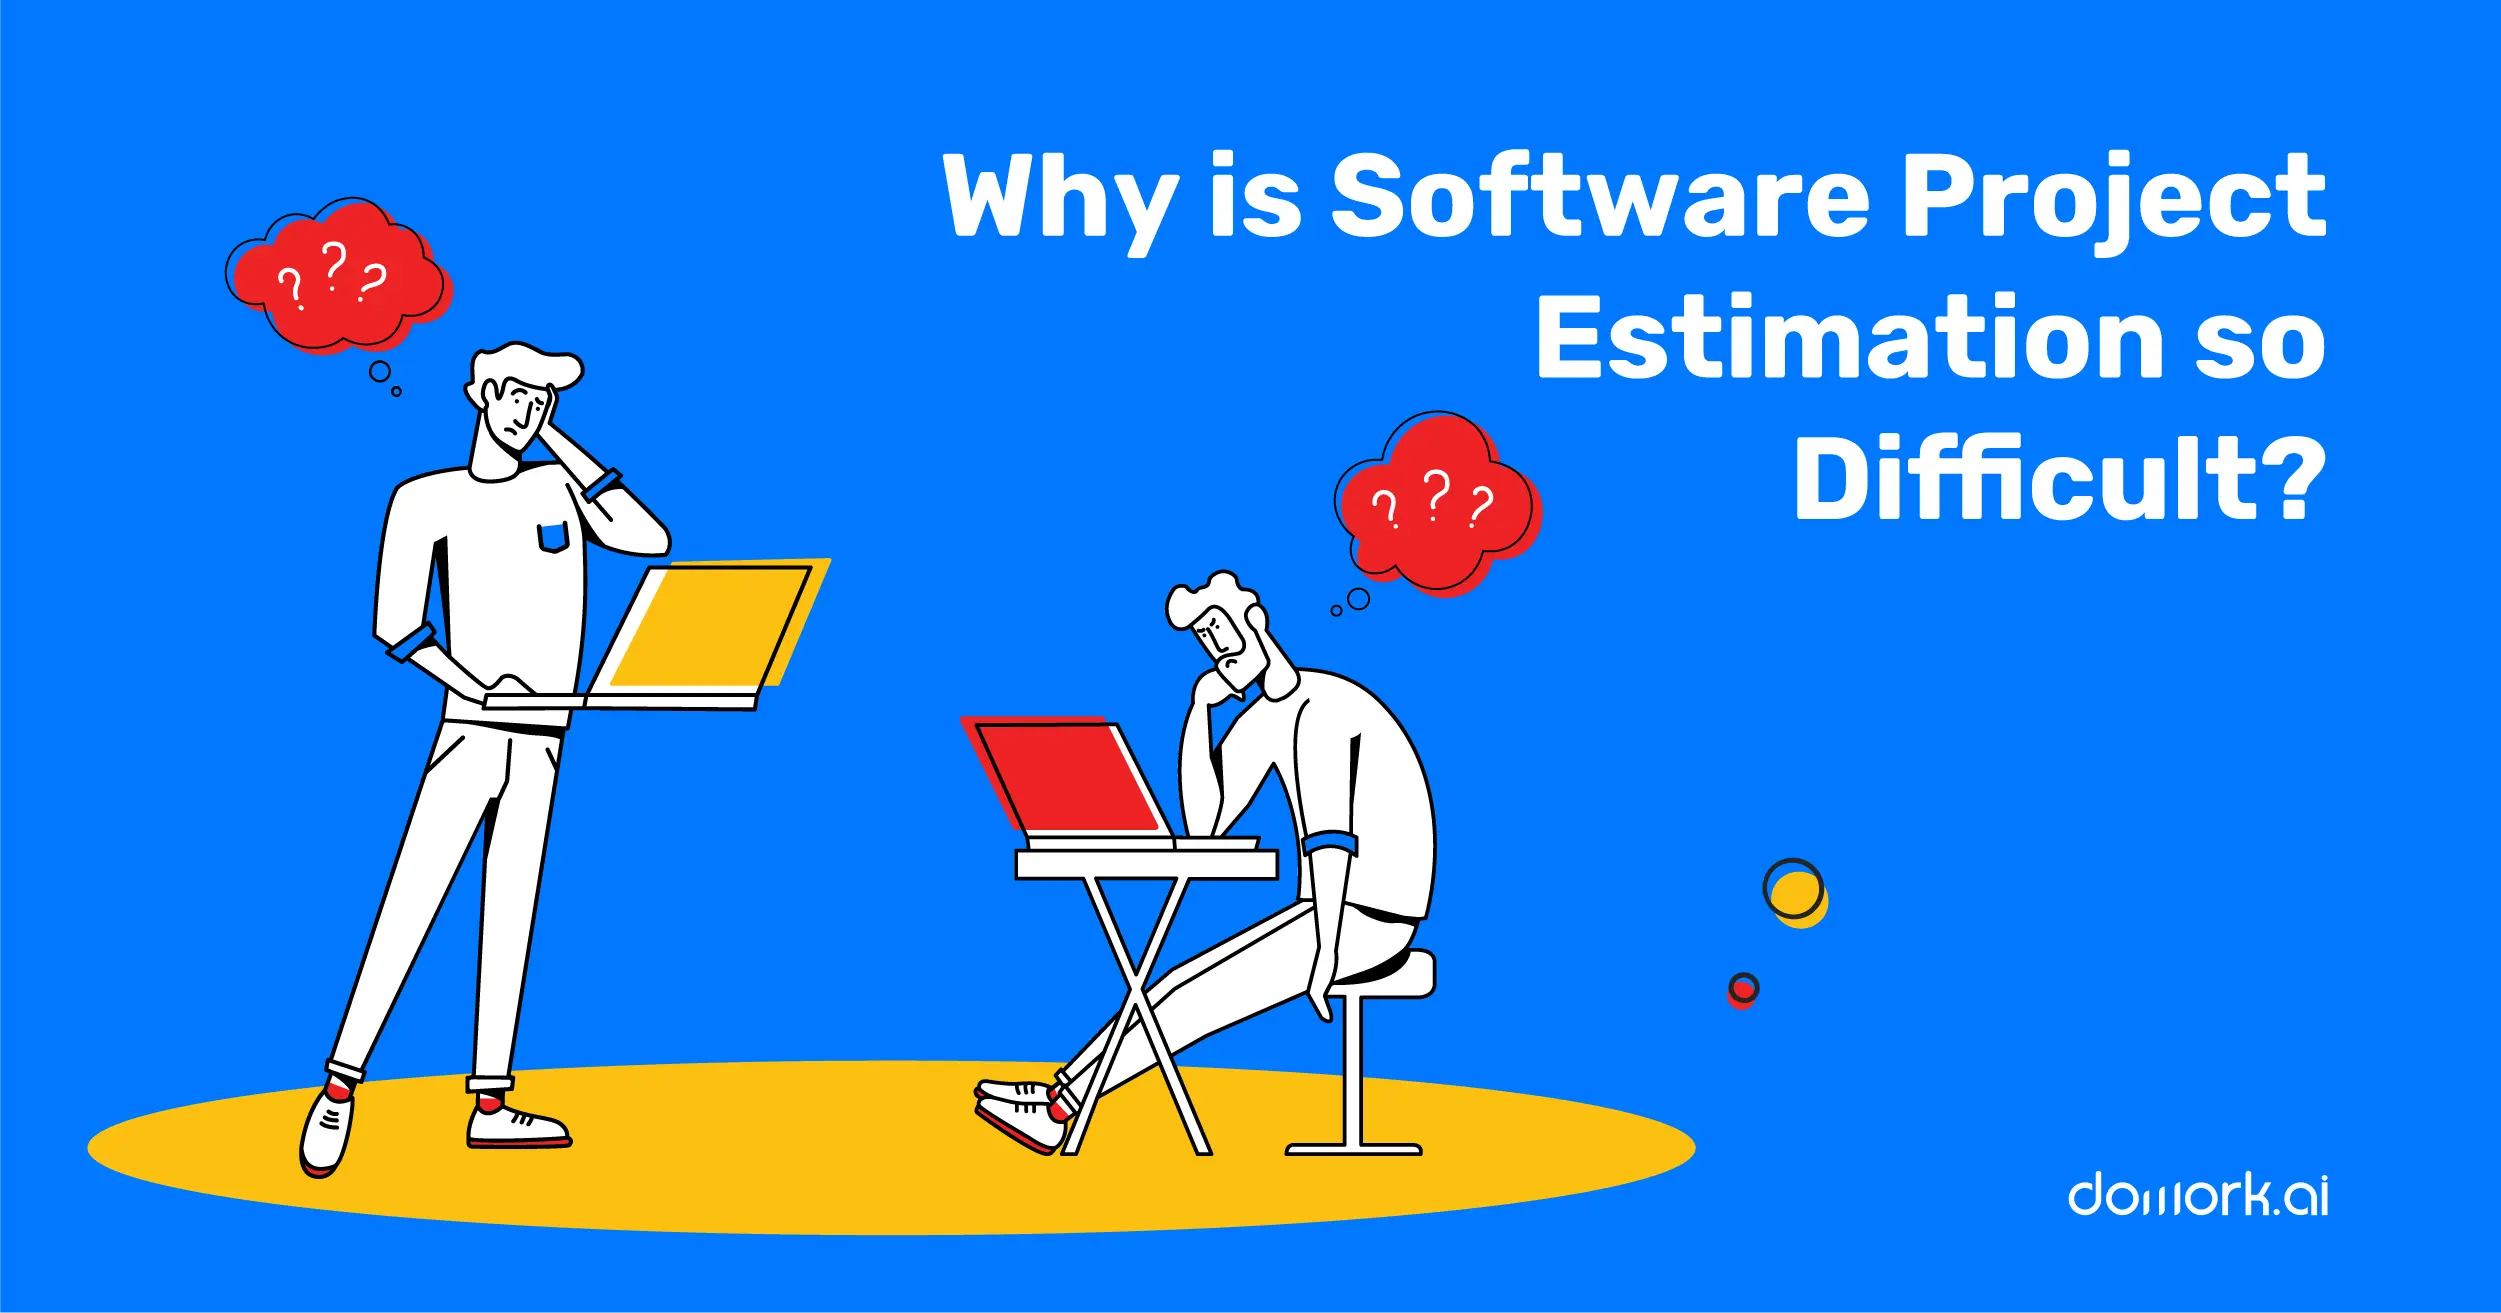 Why is Software Project Estimation so Difficult